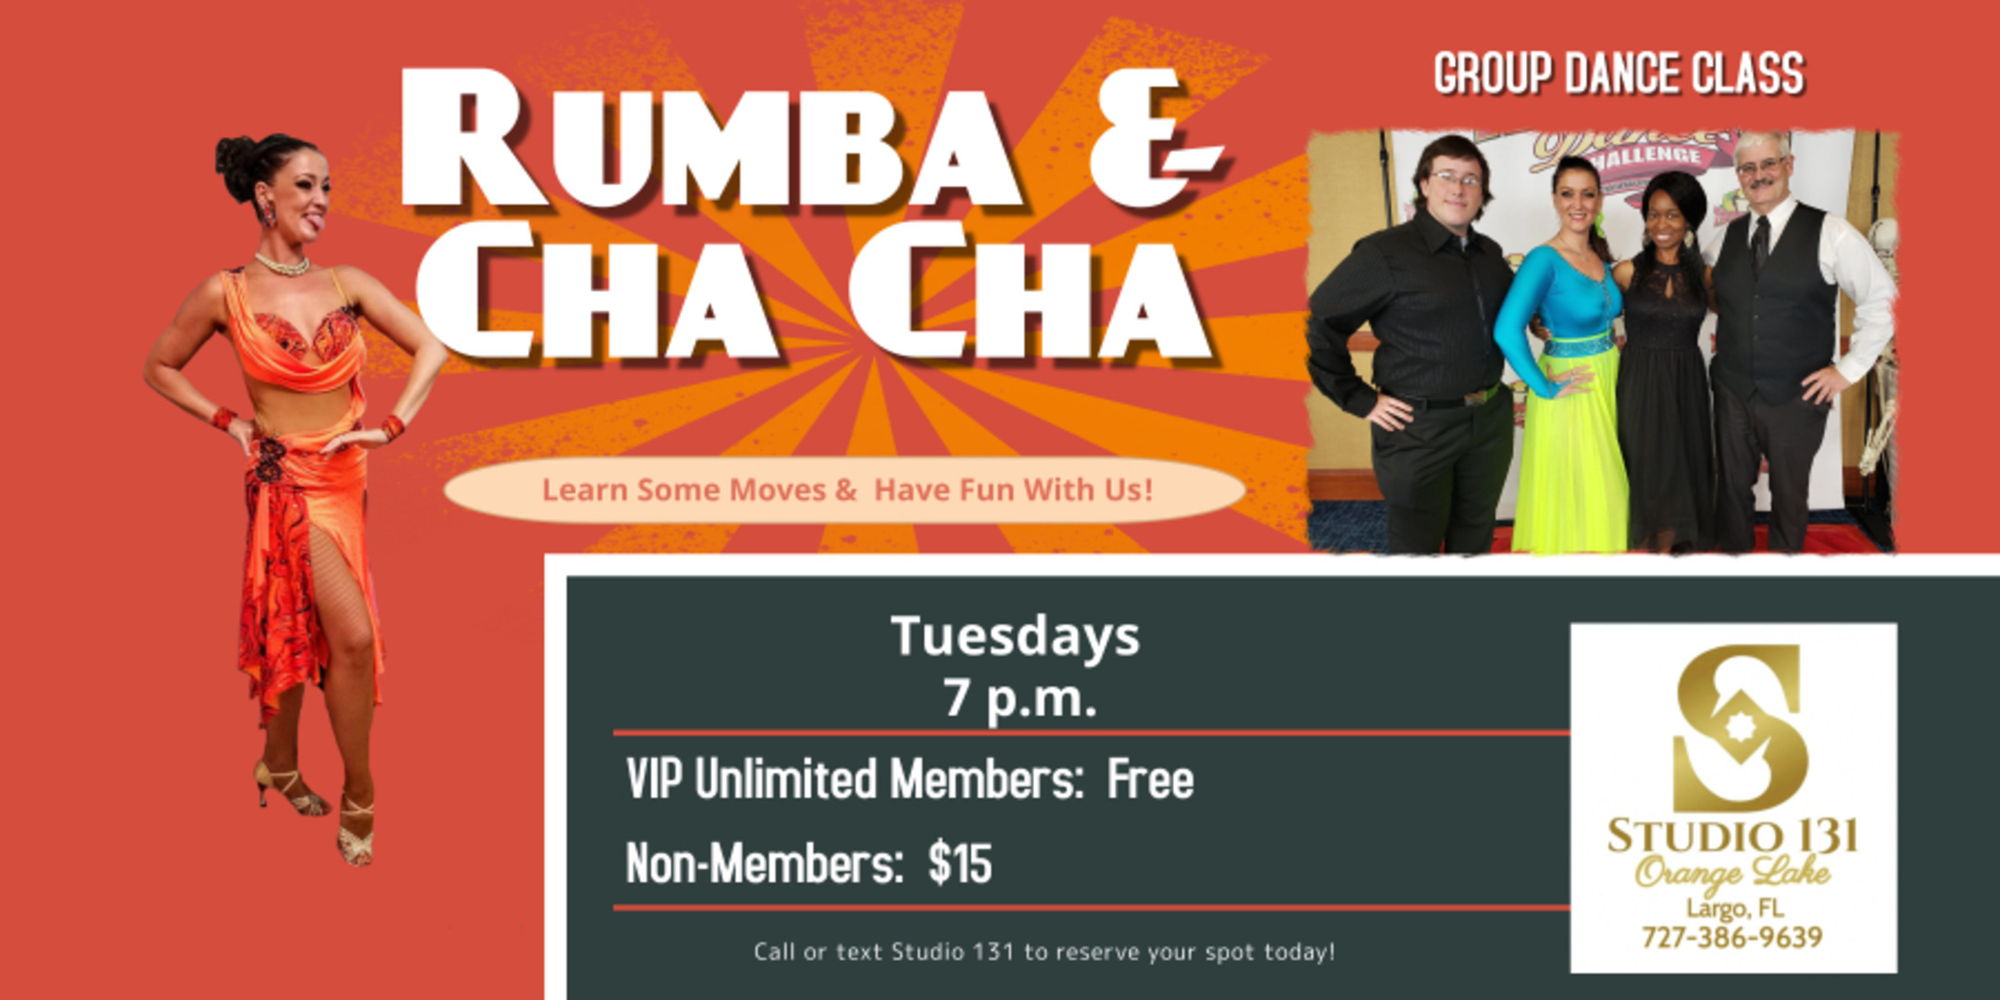 Cha Cha and Rumba Group Dance Class  promotional image